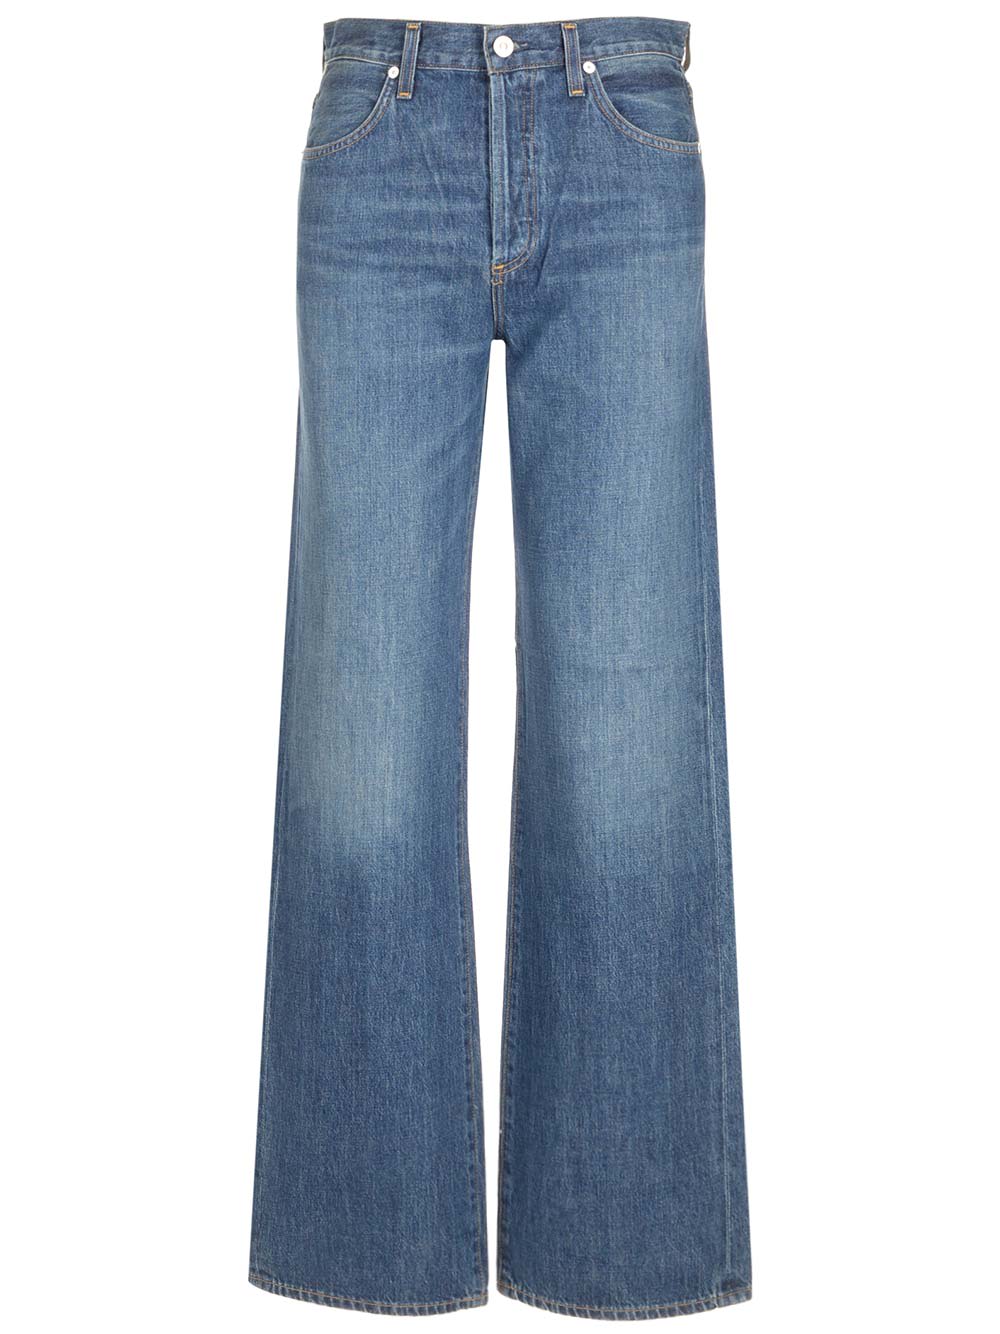 CITIZENS OF HUMANITY ANNINA WIDE LEG JEANS